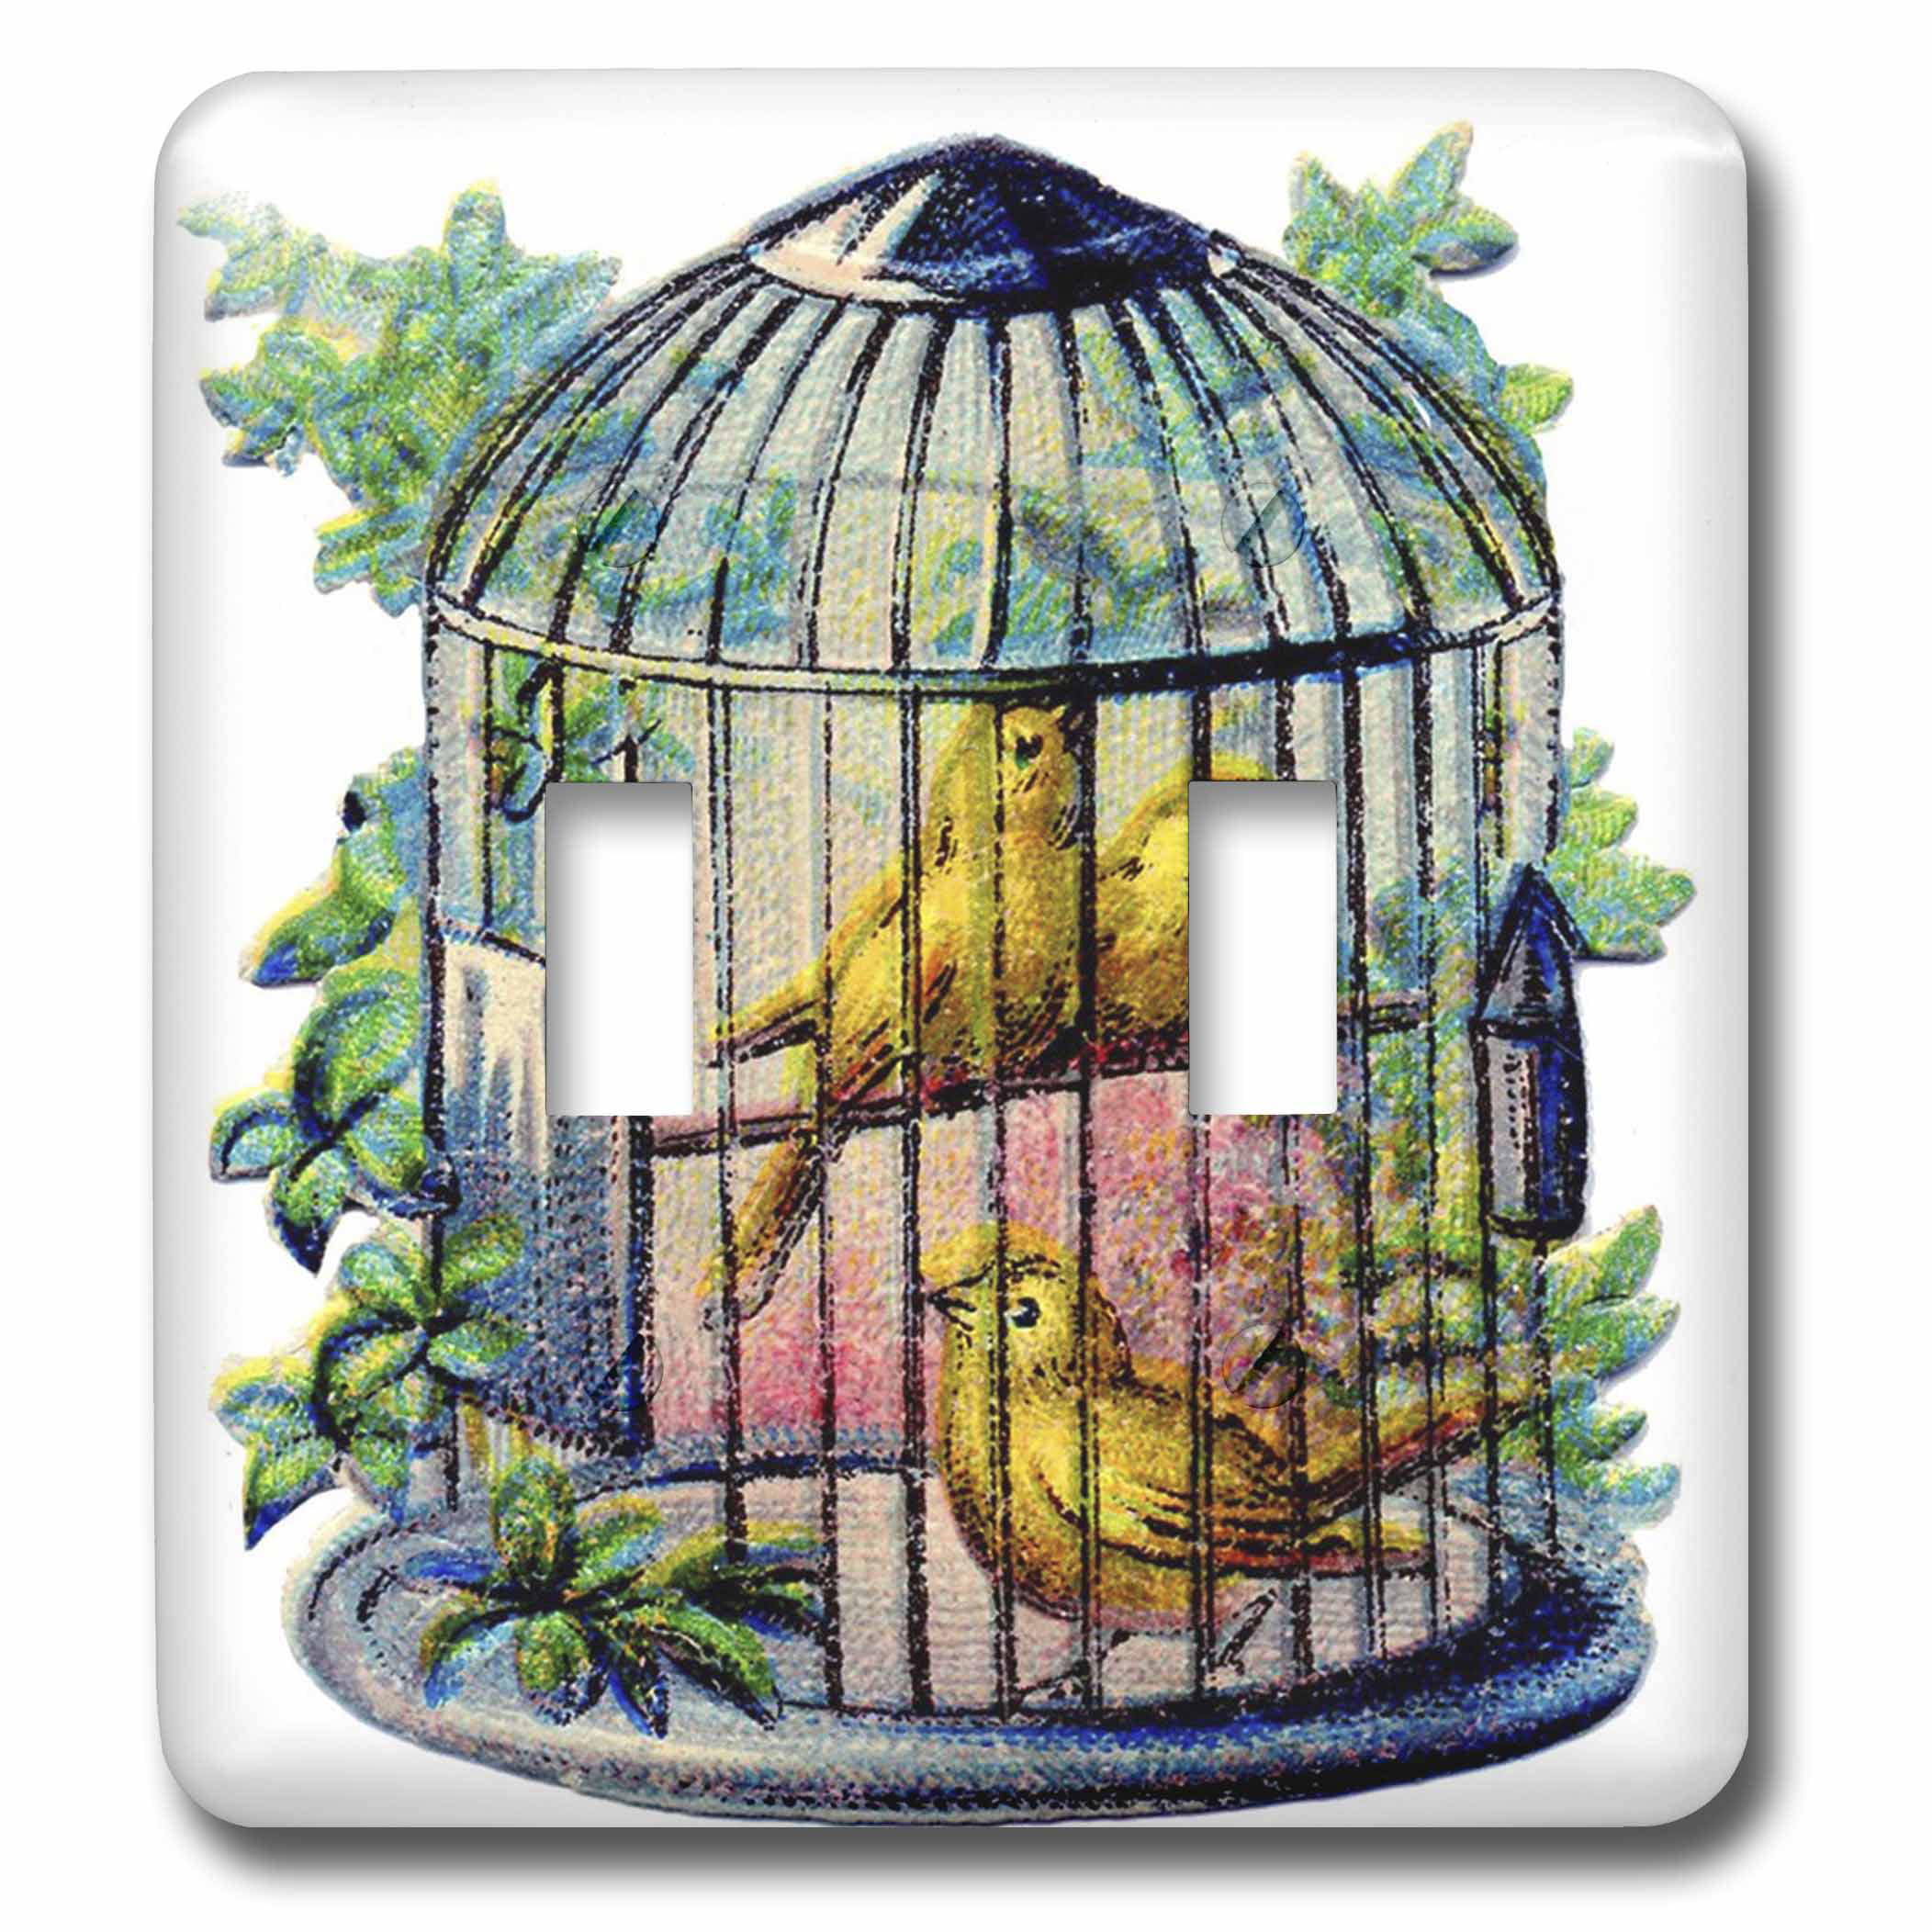 3dRose lsp_234057_1 Image of Antique Birdcage With Butterflies Single Toggle Switch